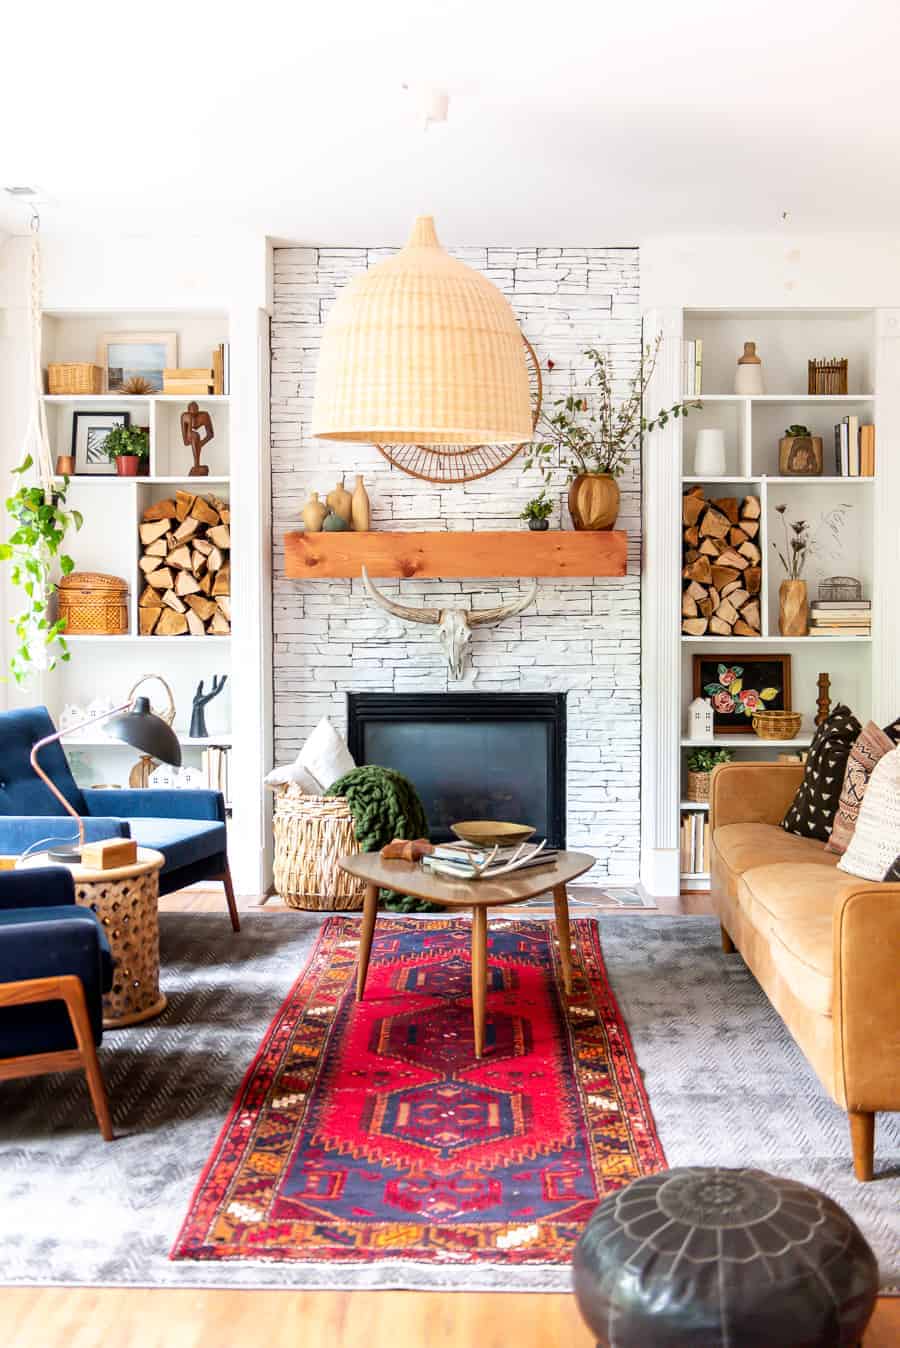 Eclectic living room decor with blue chairs, wood logs and lots of textures